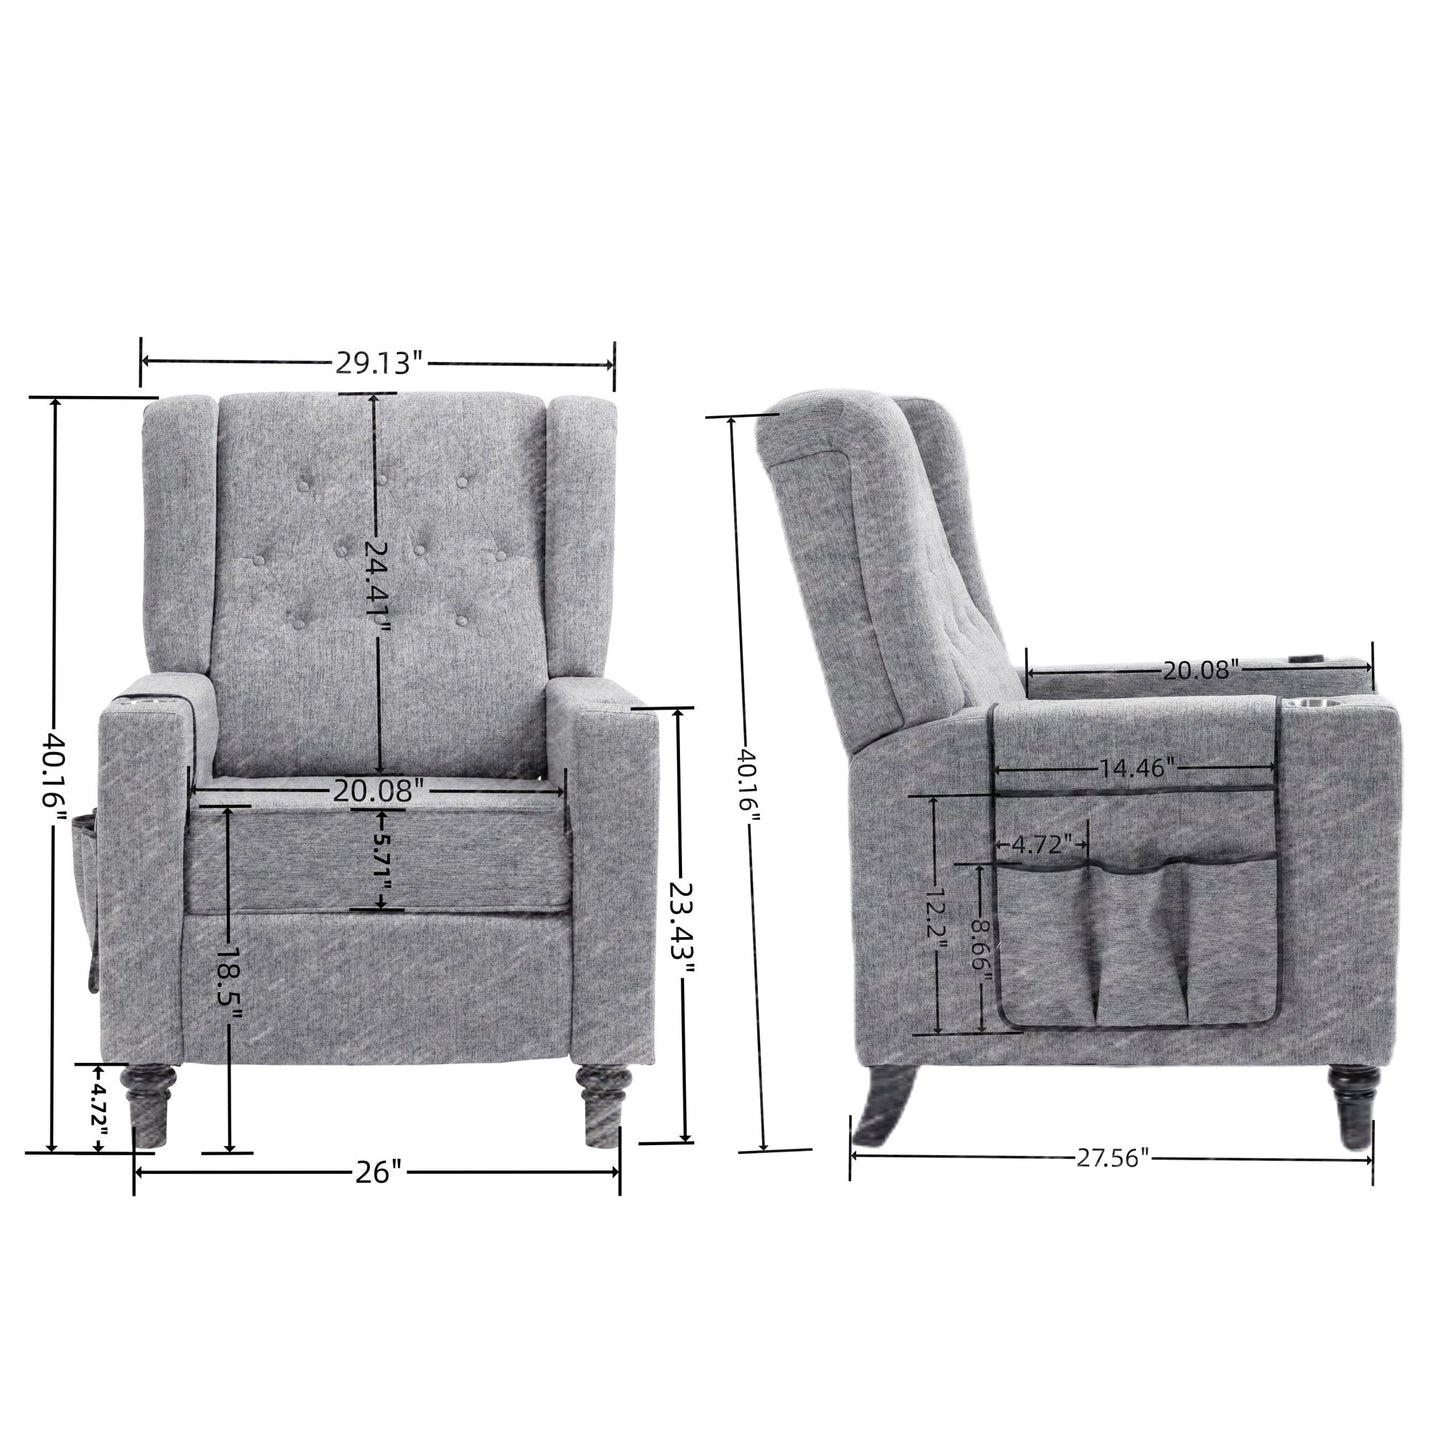 Arm Pushing Recliner Chair, Modern Button Tufted Wingback Push Back Recliner Chair, Living Room Chair Fabric Pushback Manual Single Reclining Sofa Home Theater Seating for Bedroom,Khaki Yelkow